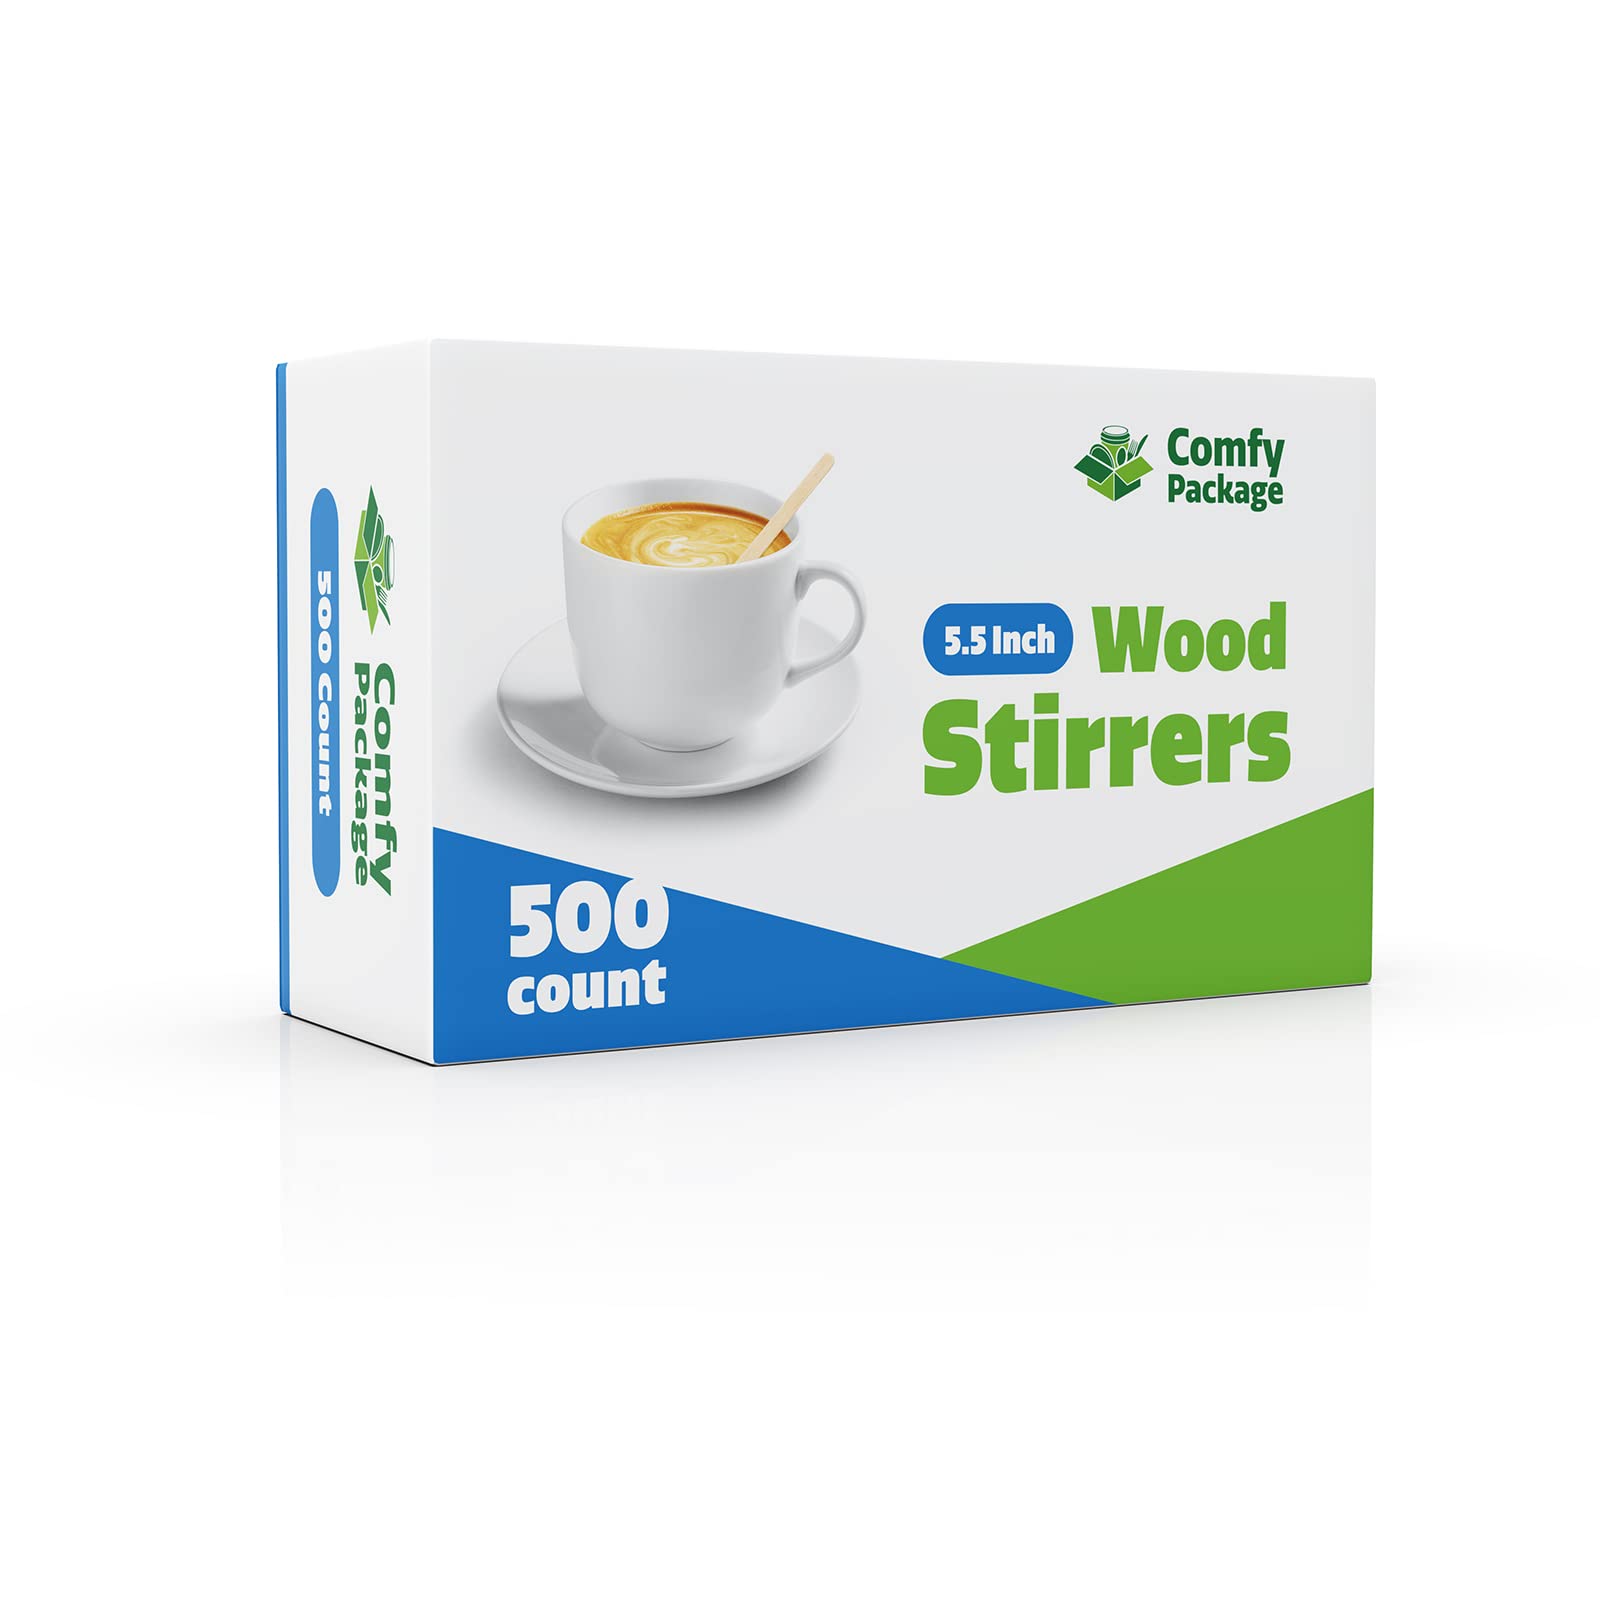 Comfy Package, [500 Count] 5.5 Inch Wooden Coffee Stirrers - Wood Stir Sticks